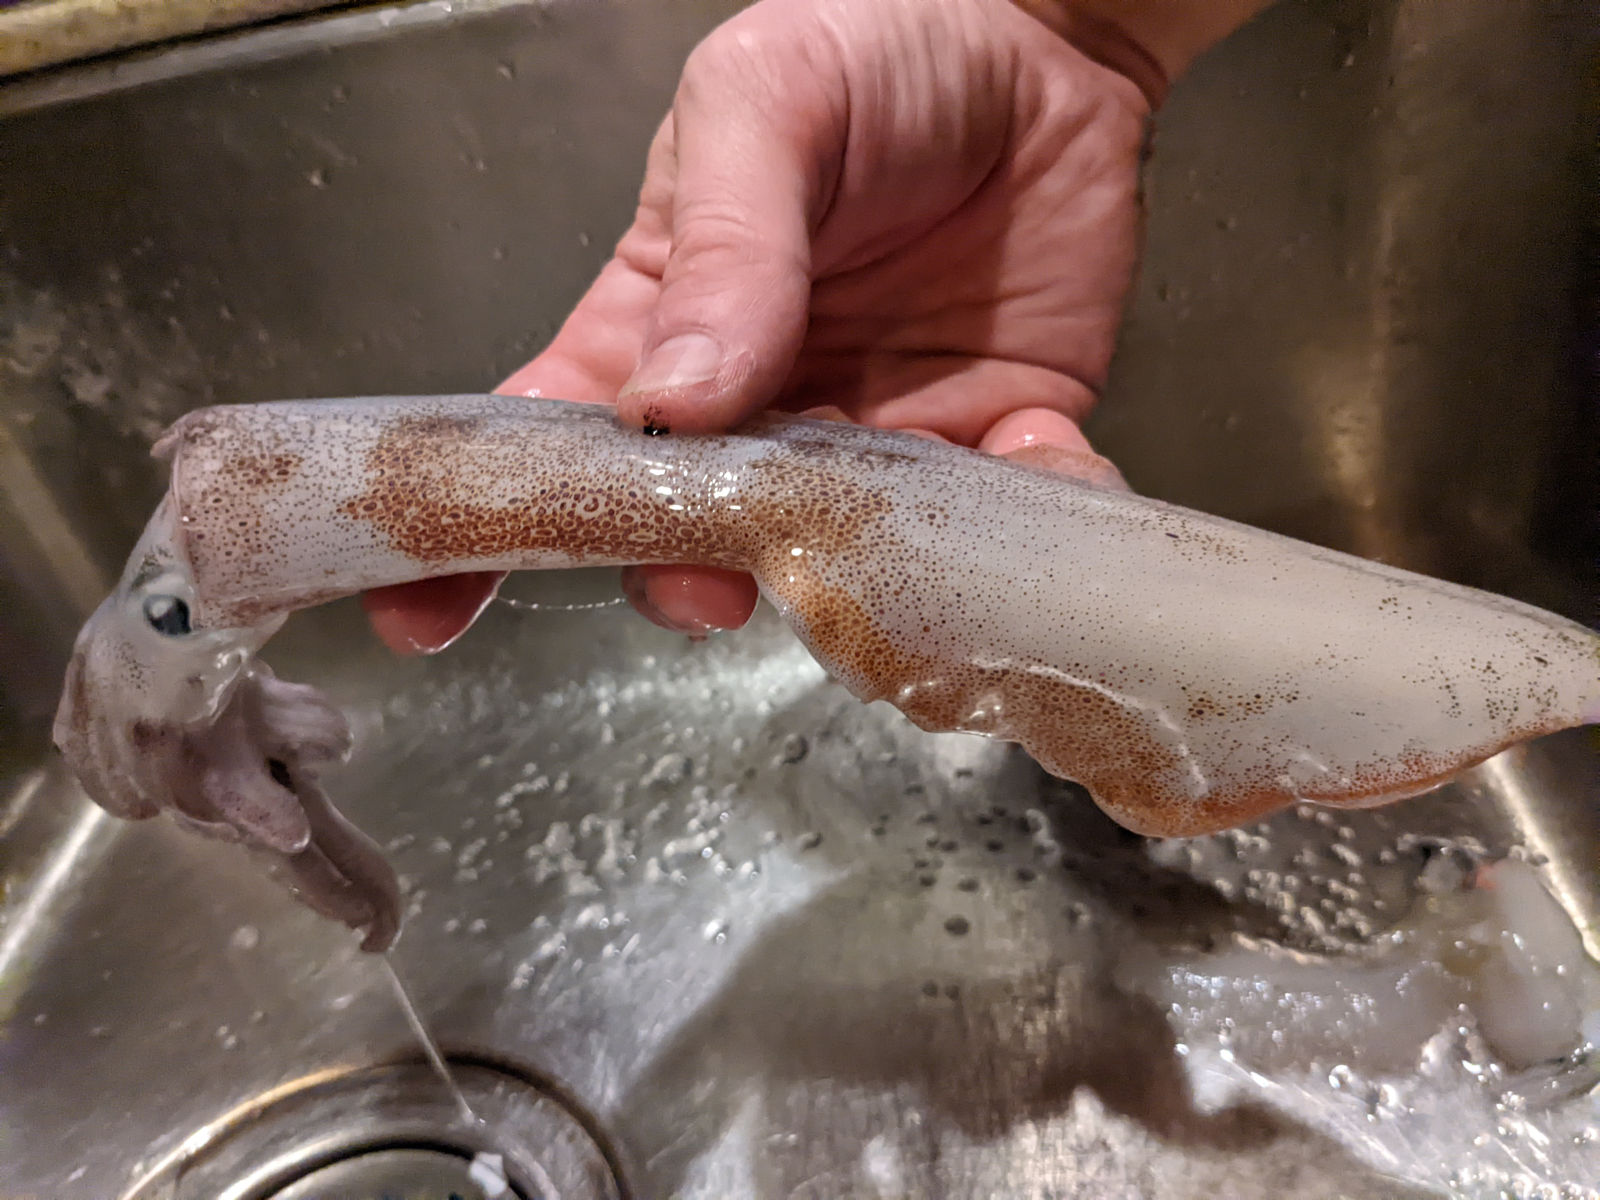 A squid ready to be cleaned